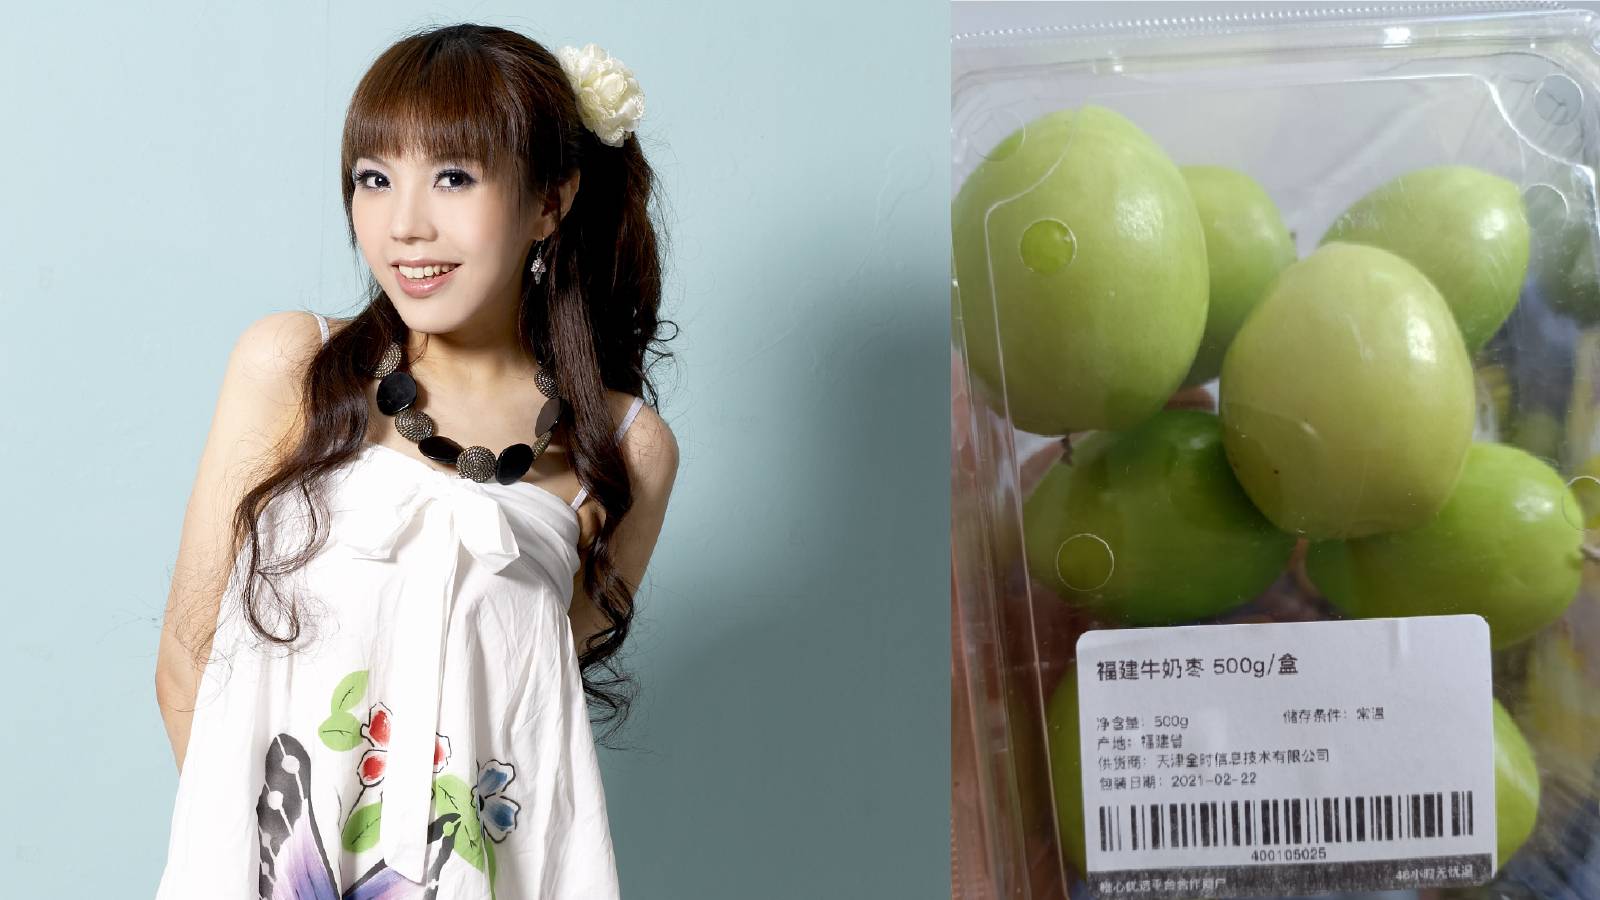 This China-Based Taiwanese Actress Rants About How Expensive Fruits And Eggs Are In Taiwan